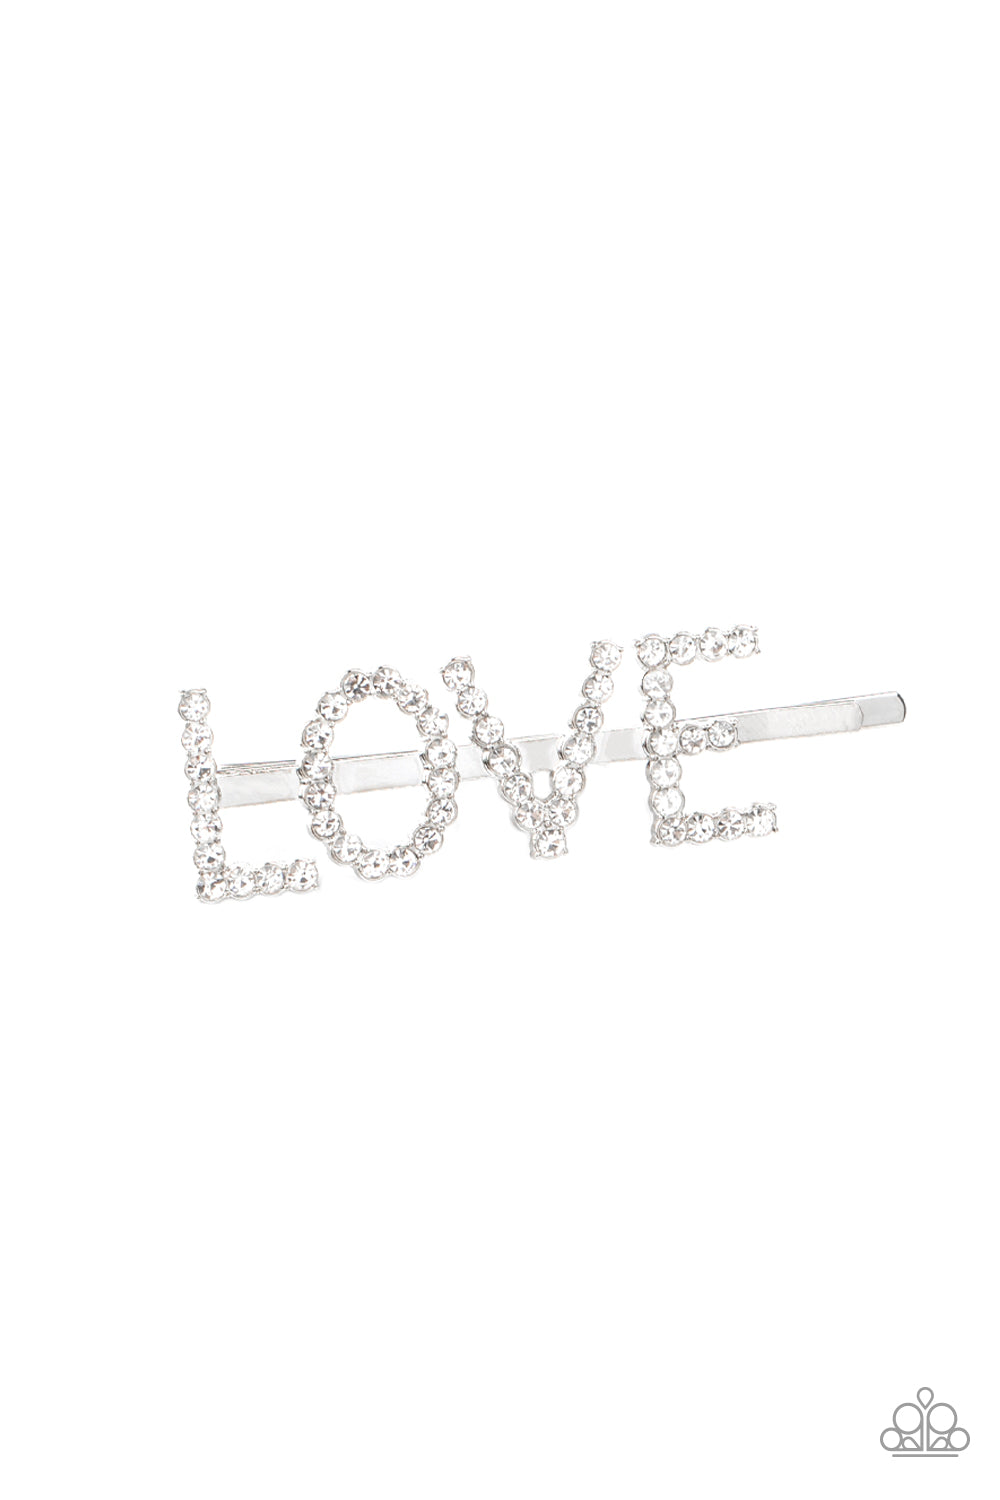 Paparazzi All You Need Is Love - White Rhinestone Bobby Pin - A Finishing Touch 